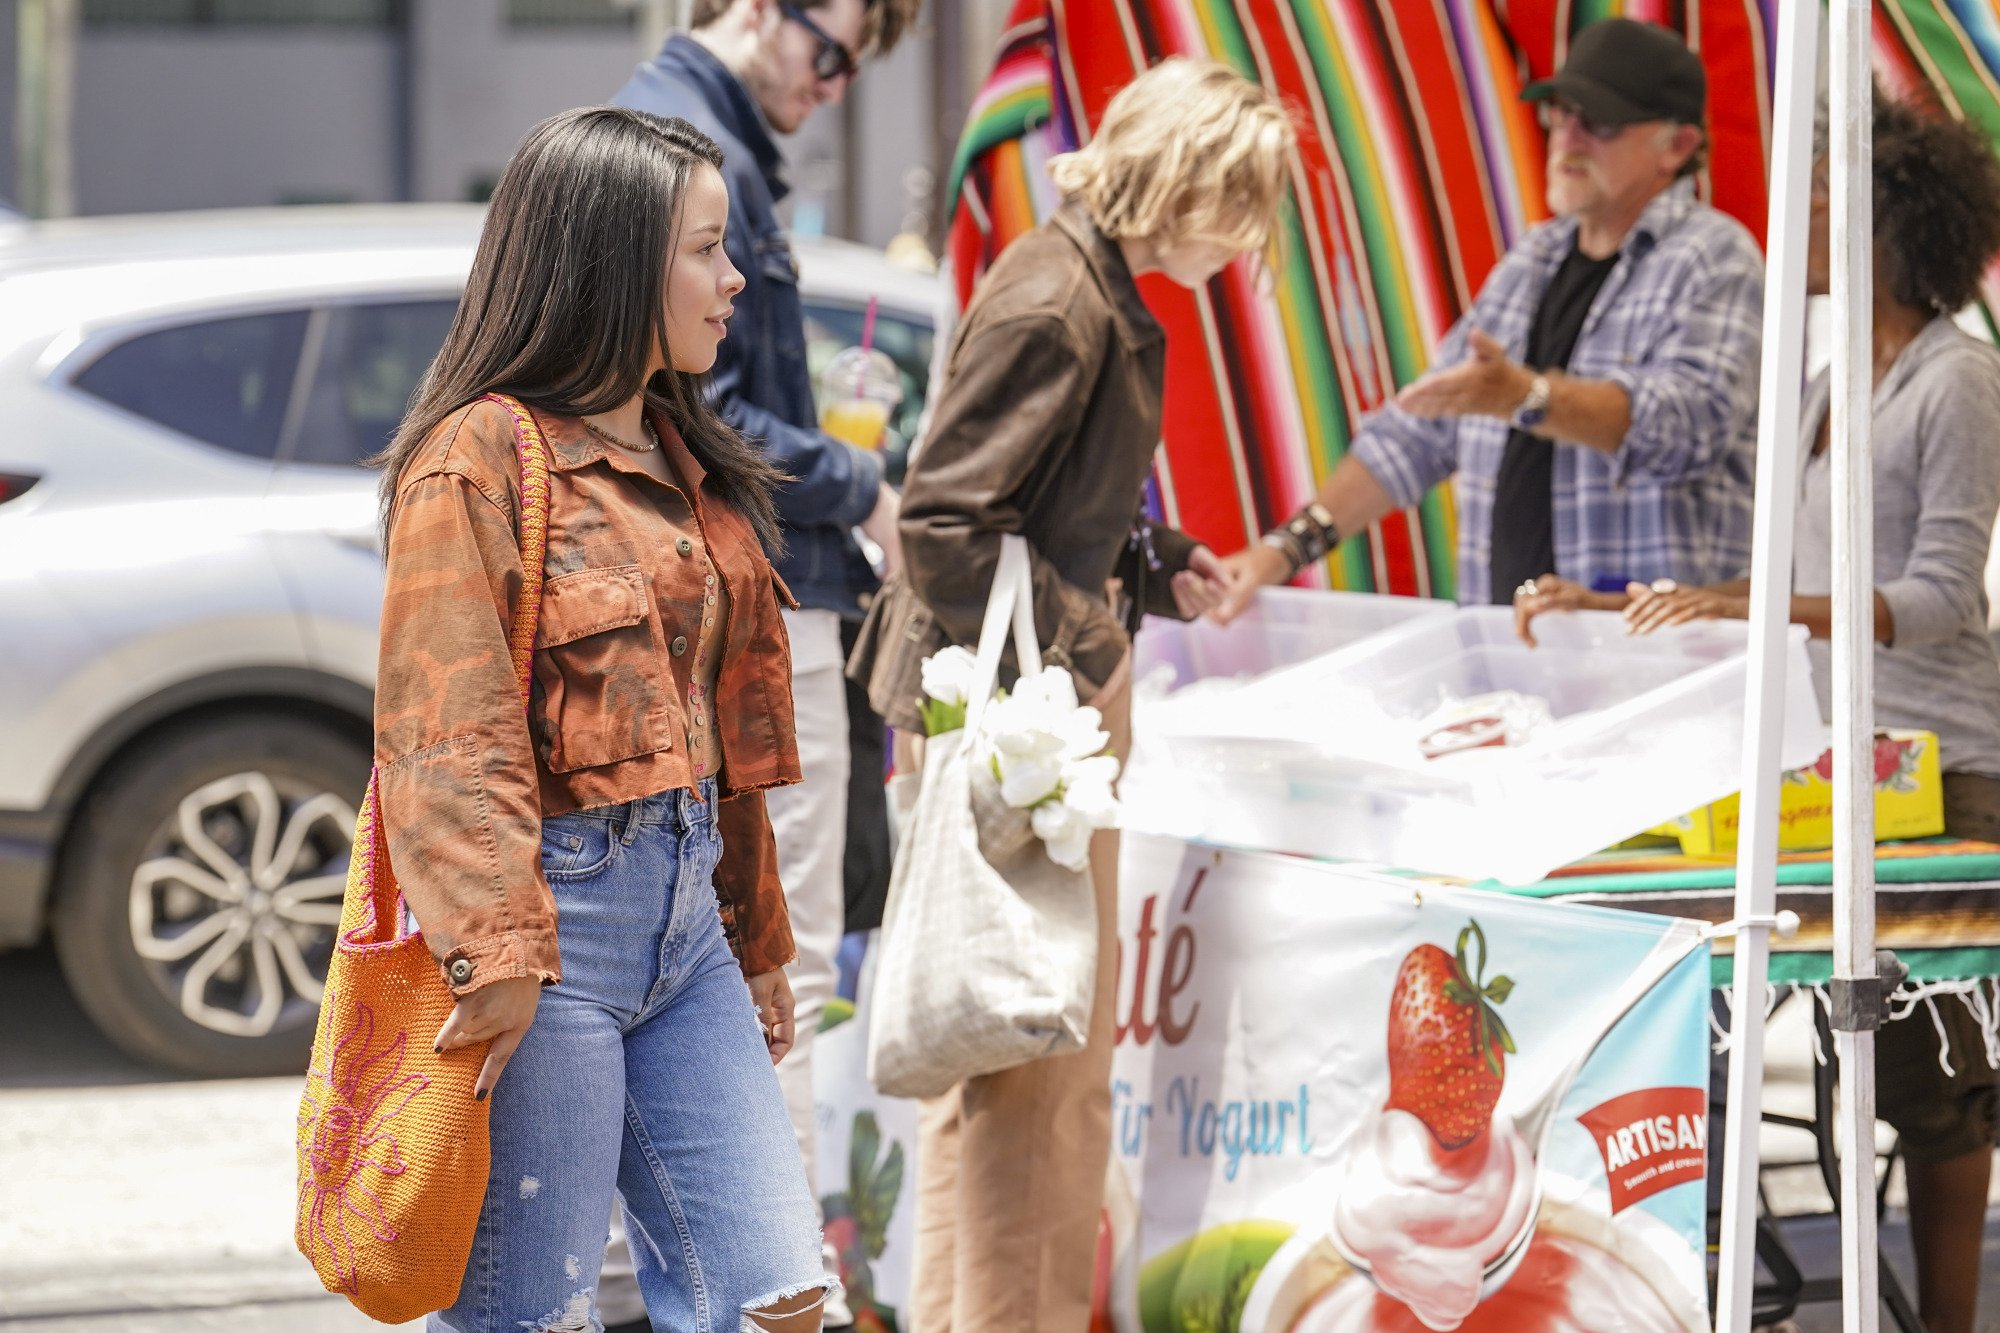 A young woman wearing an orange jacket and bag walks past a farmers' market stall.